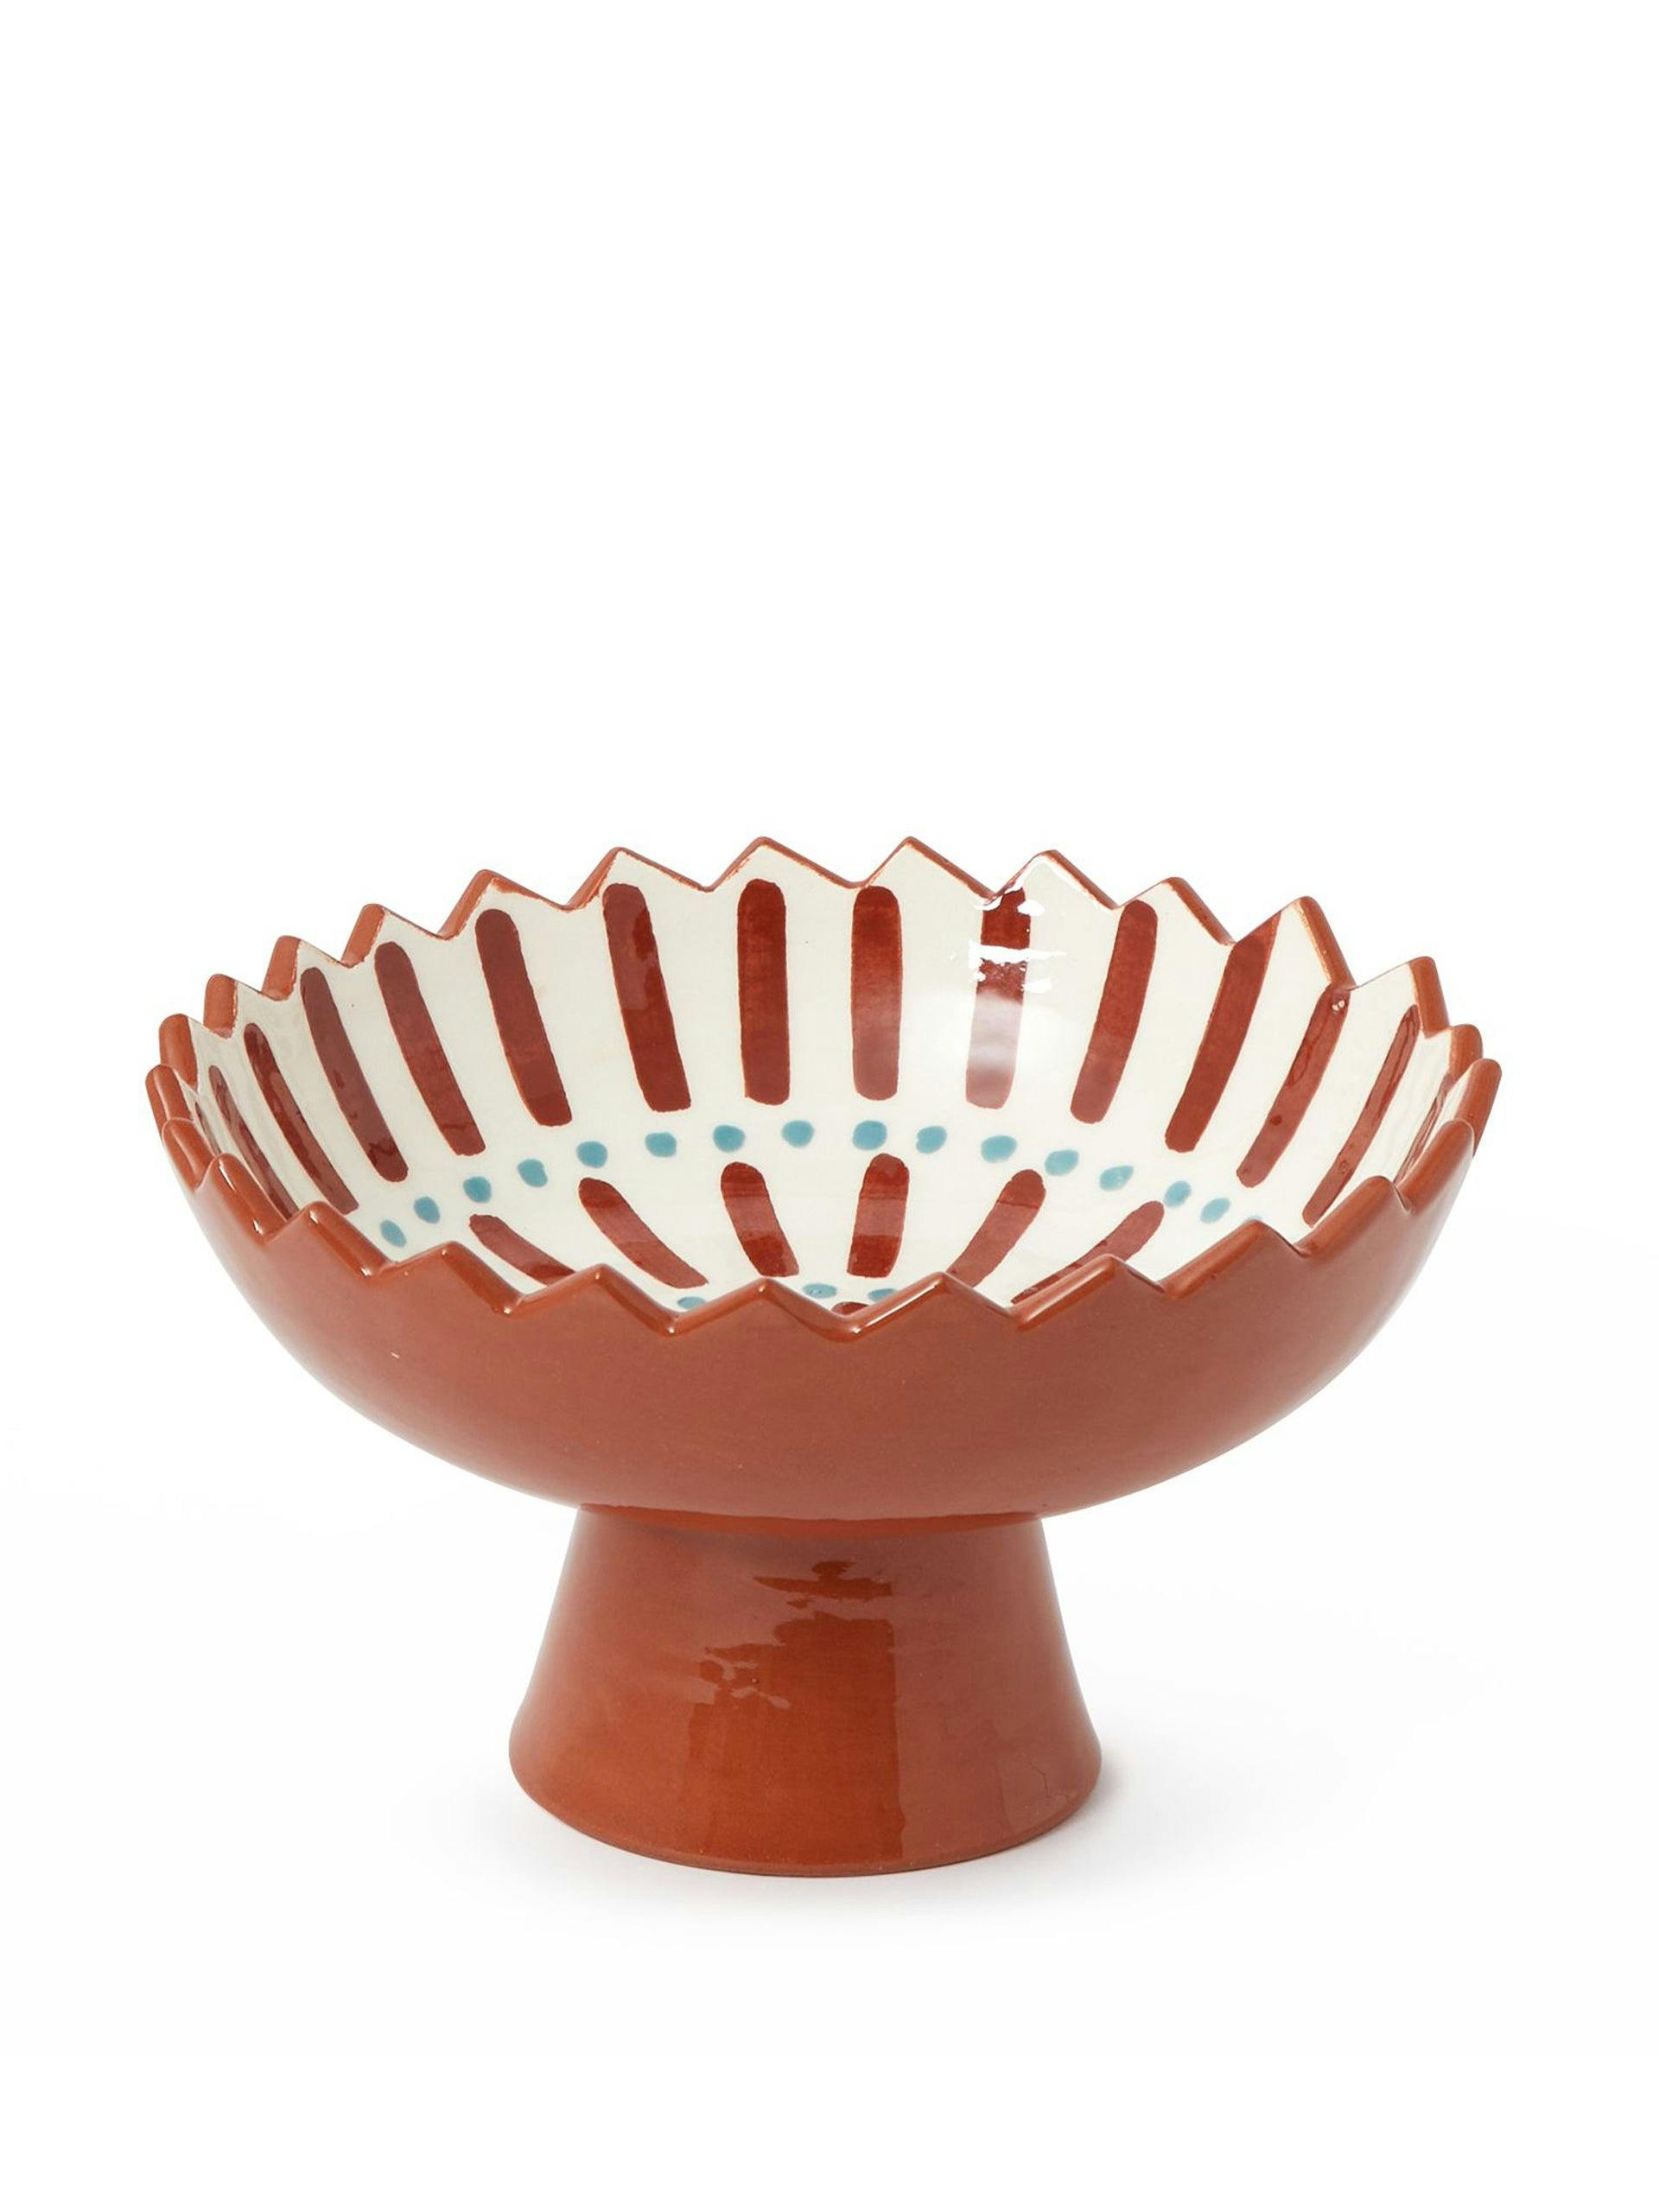 Terracotta hand-painted fruit stand